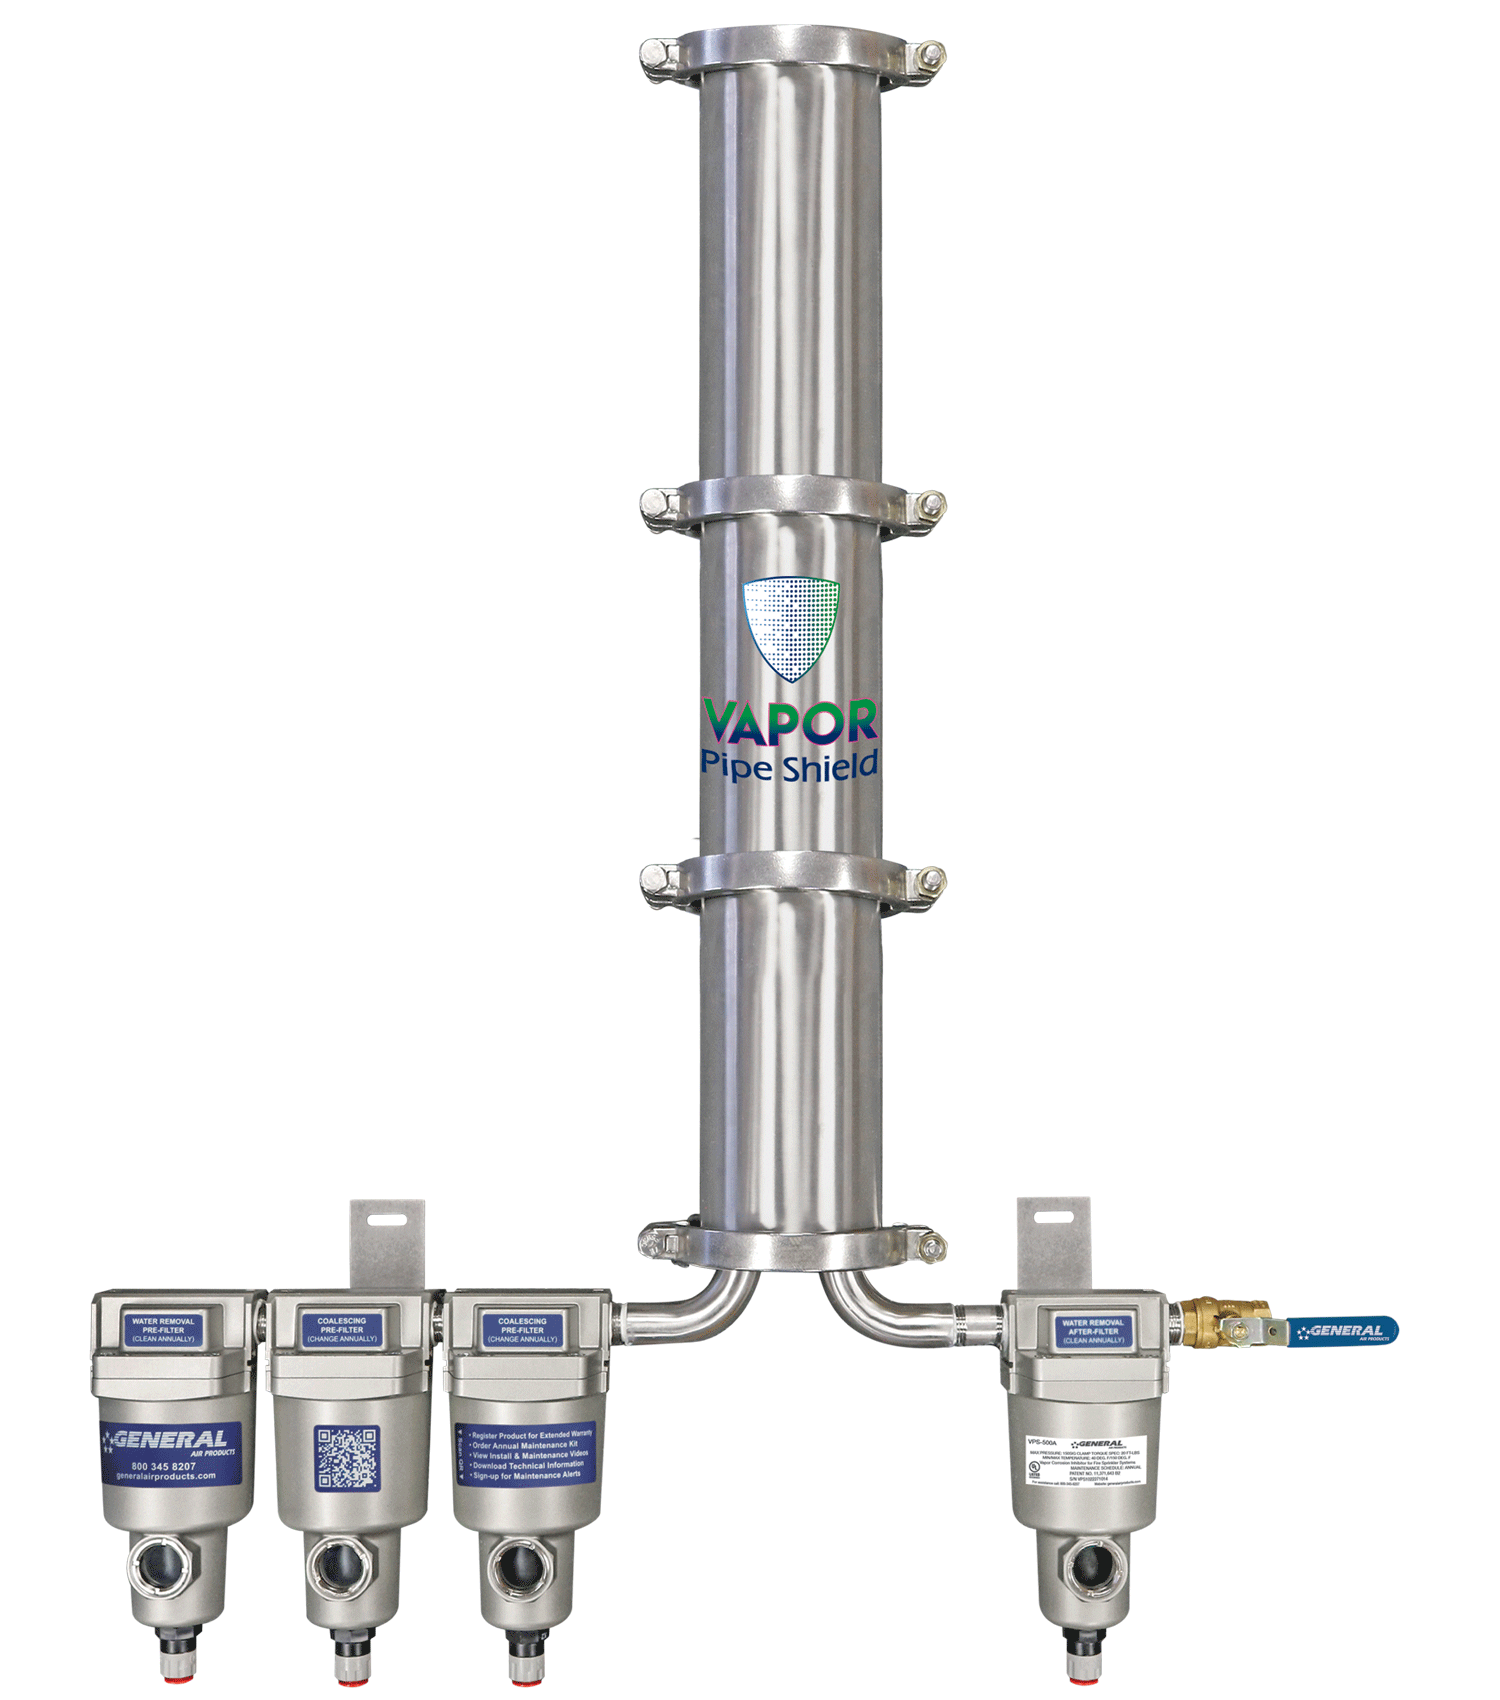 Vapor Pipe Shield - VPS-1500A. Corrosion prevention in dry and pre-action fire sprinkler systems.